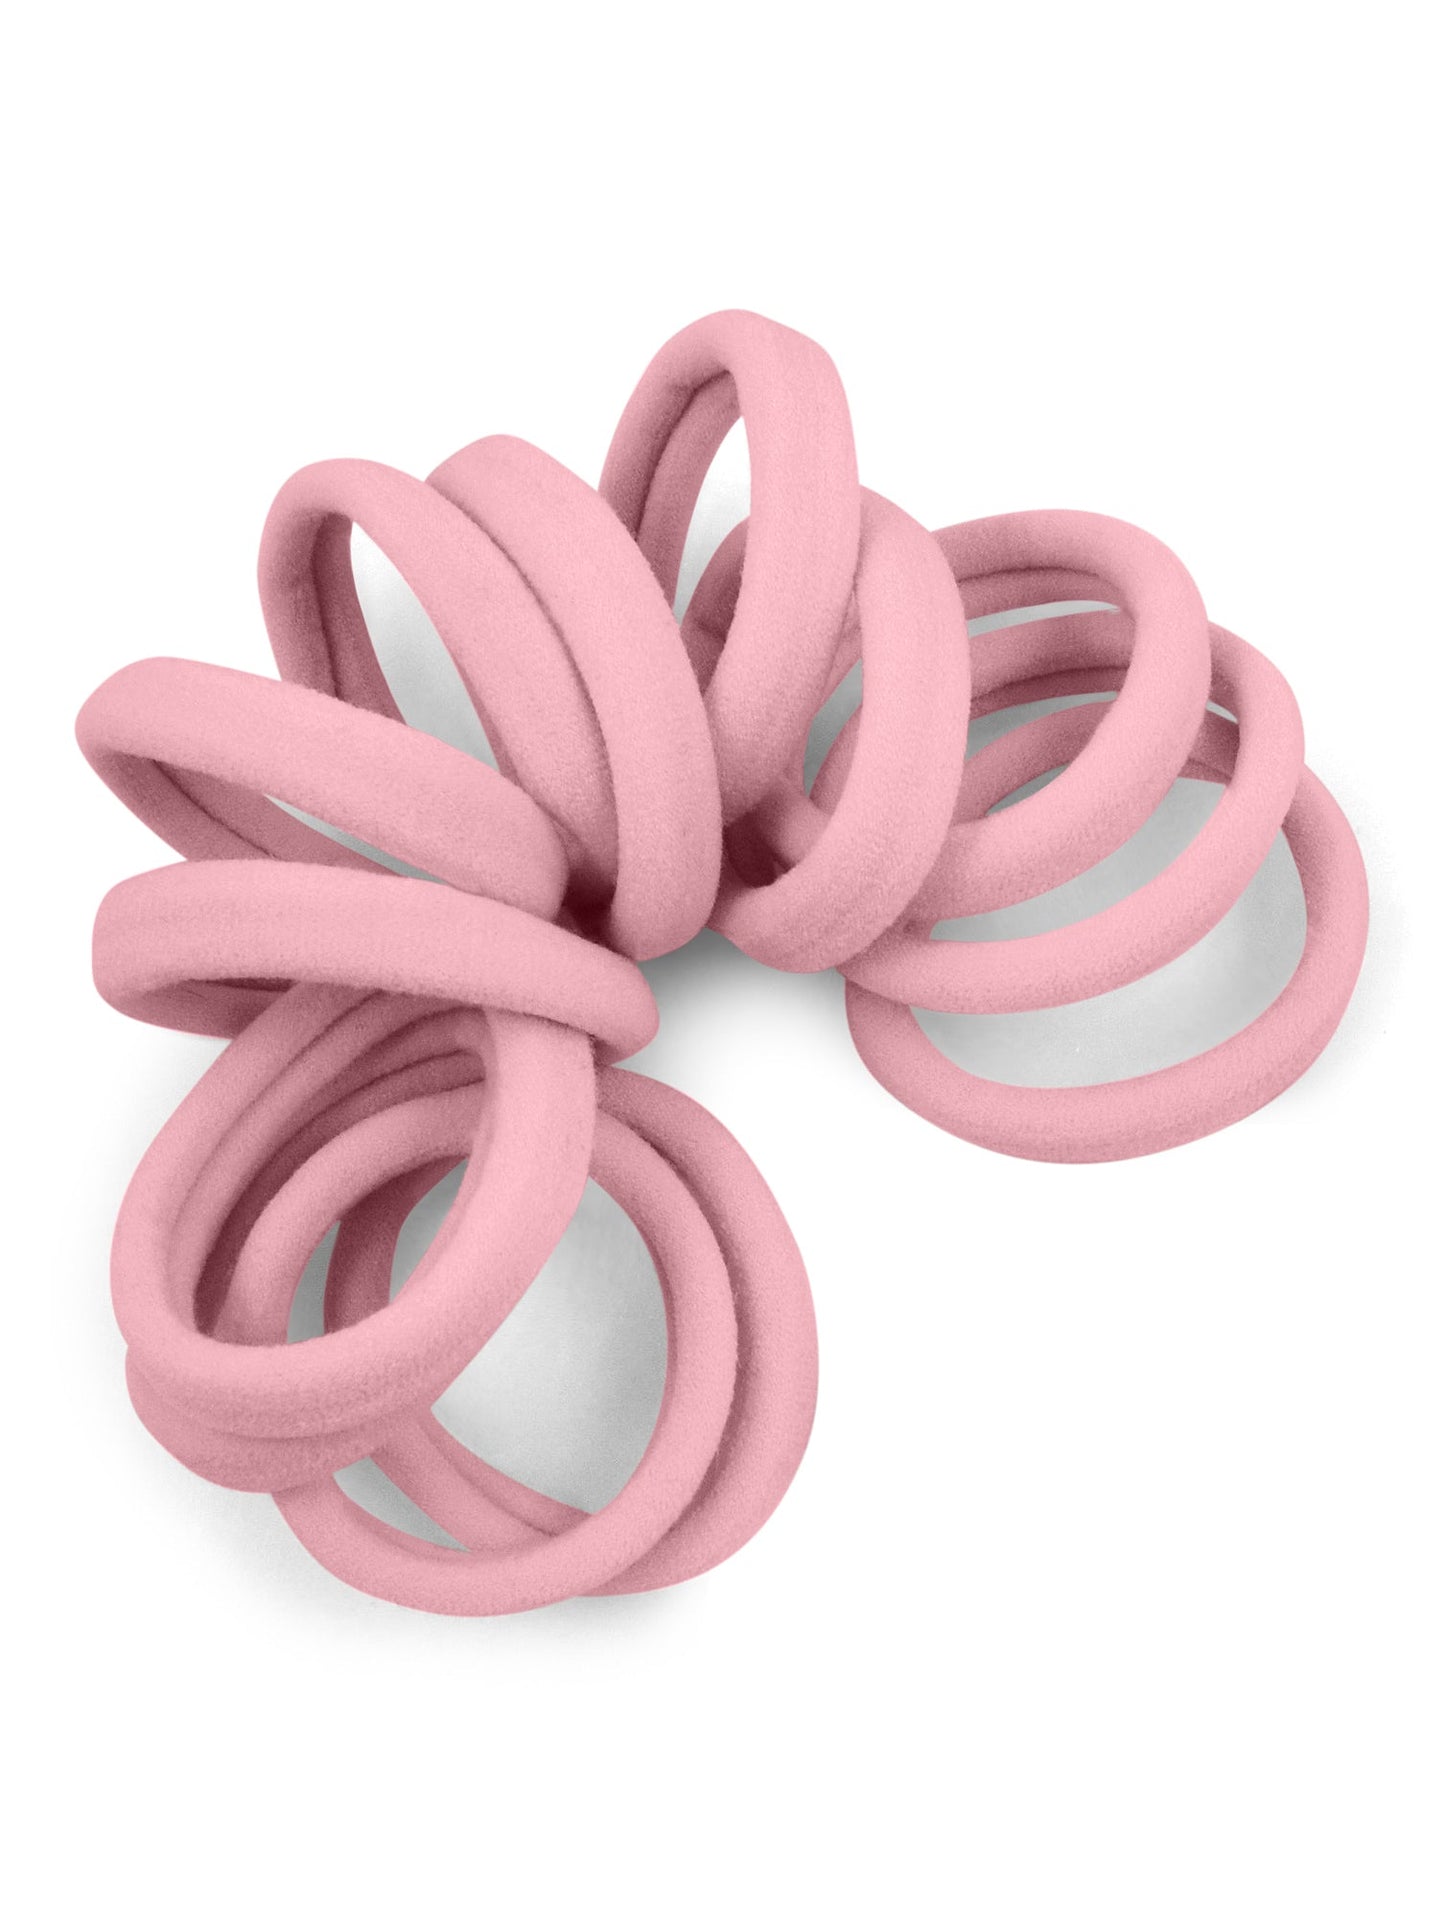 Seamless Hair Ties - Gentle Hold - 12 Count - Light Pink